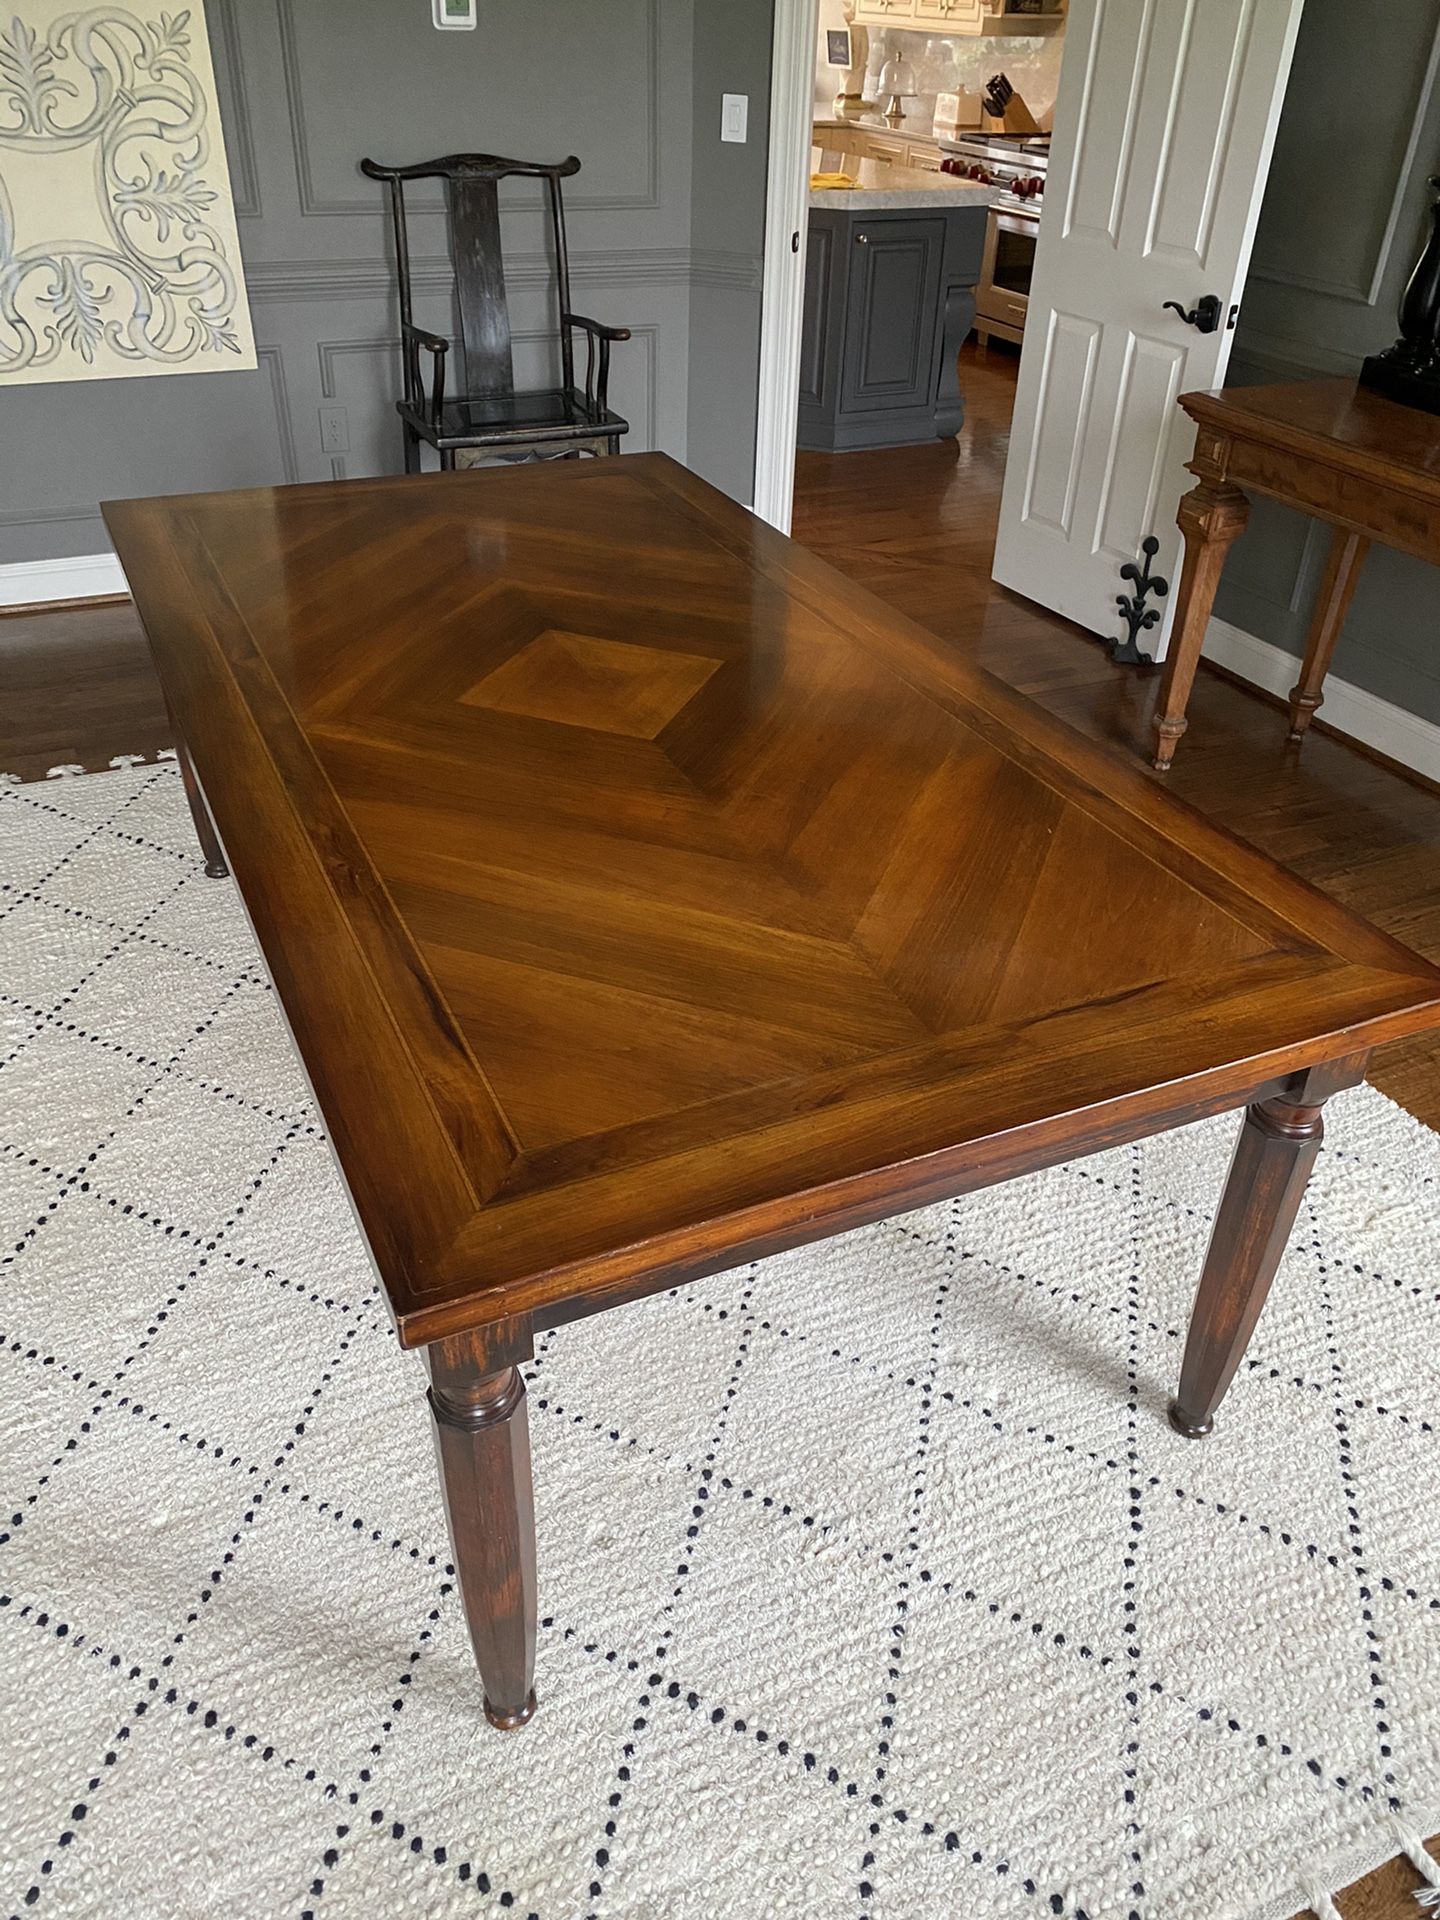 Crate and Barrel dining table